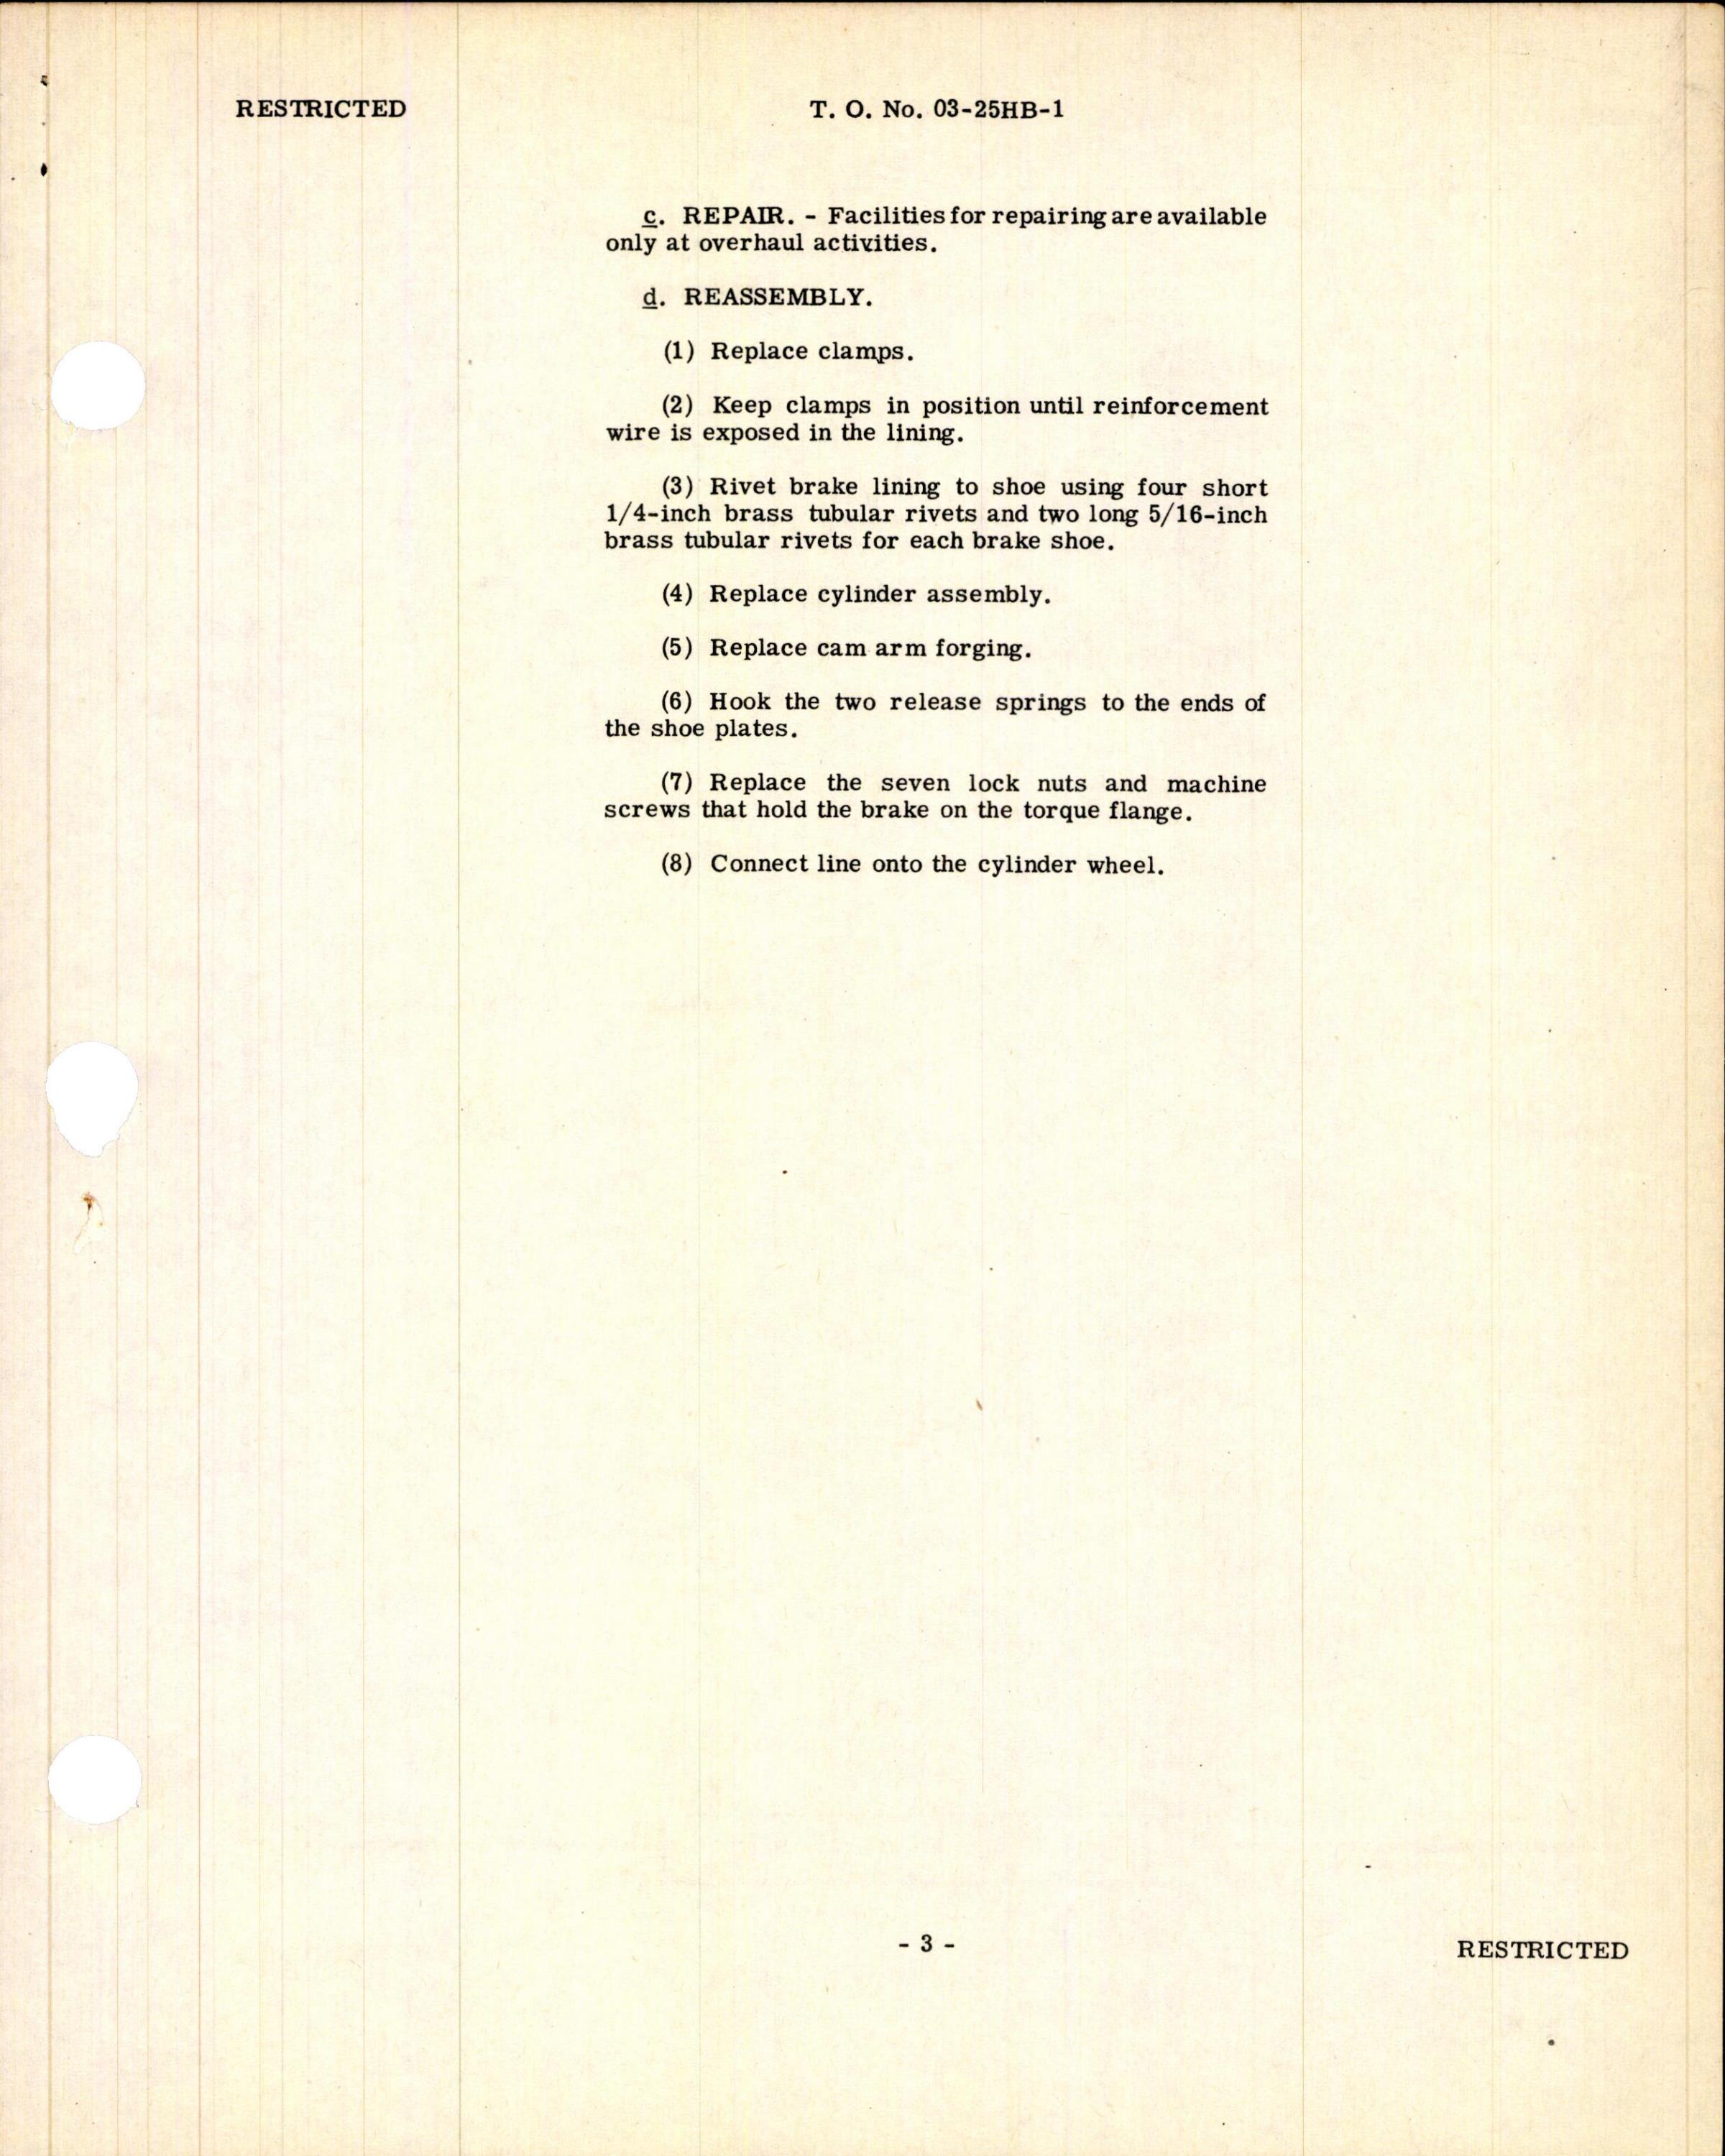 Sample page 7 from AirCorps Library document: Handbook of Instructions for Hydraulic Brake Assembly